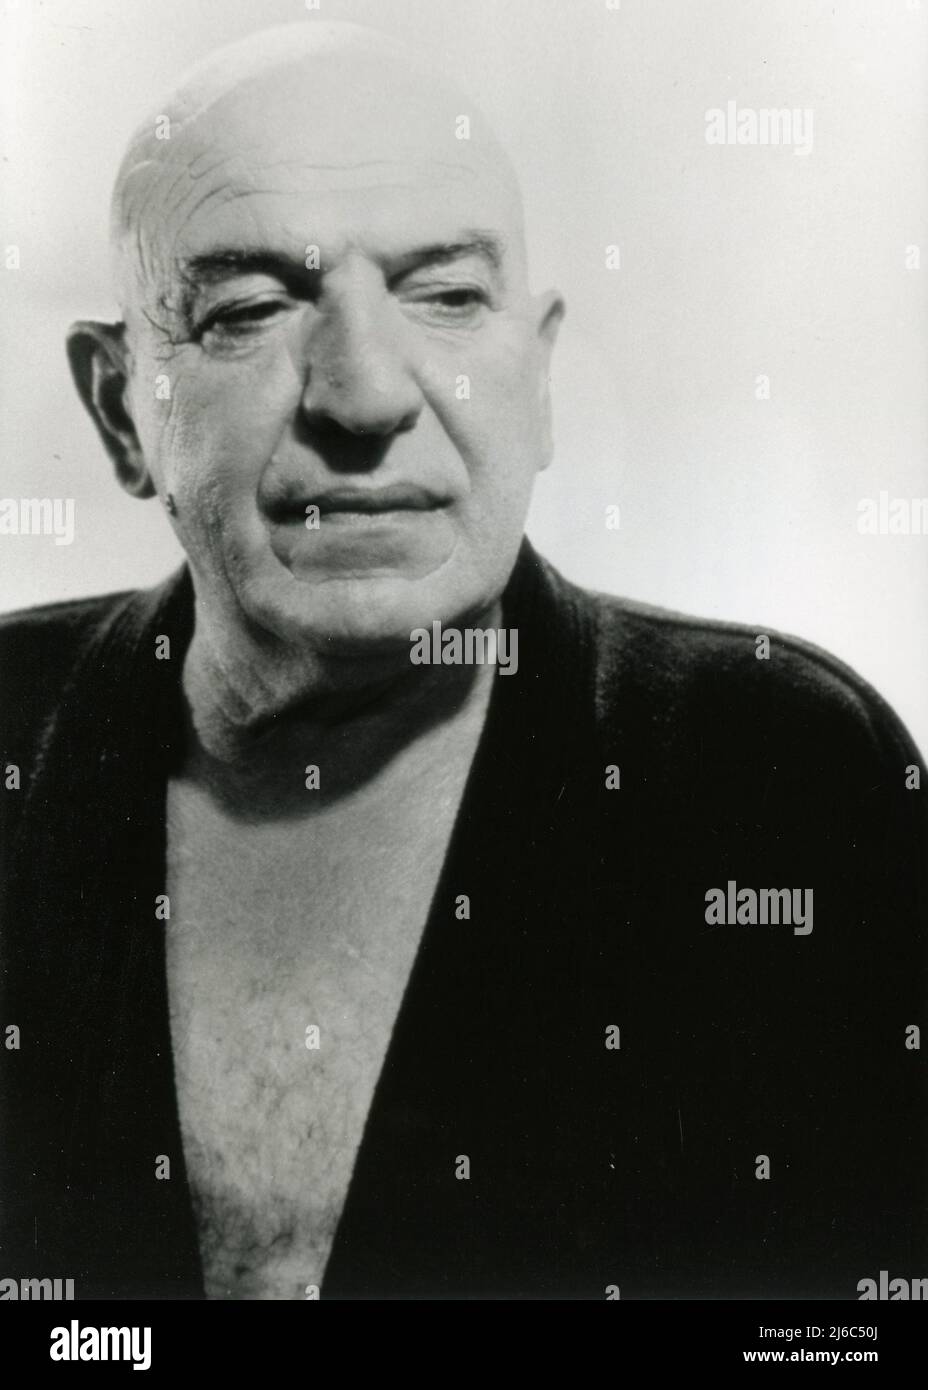 American actor Telly Savalas in the movie The Hollywood Detective, USA 1989  Stock Photo - Alamy